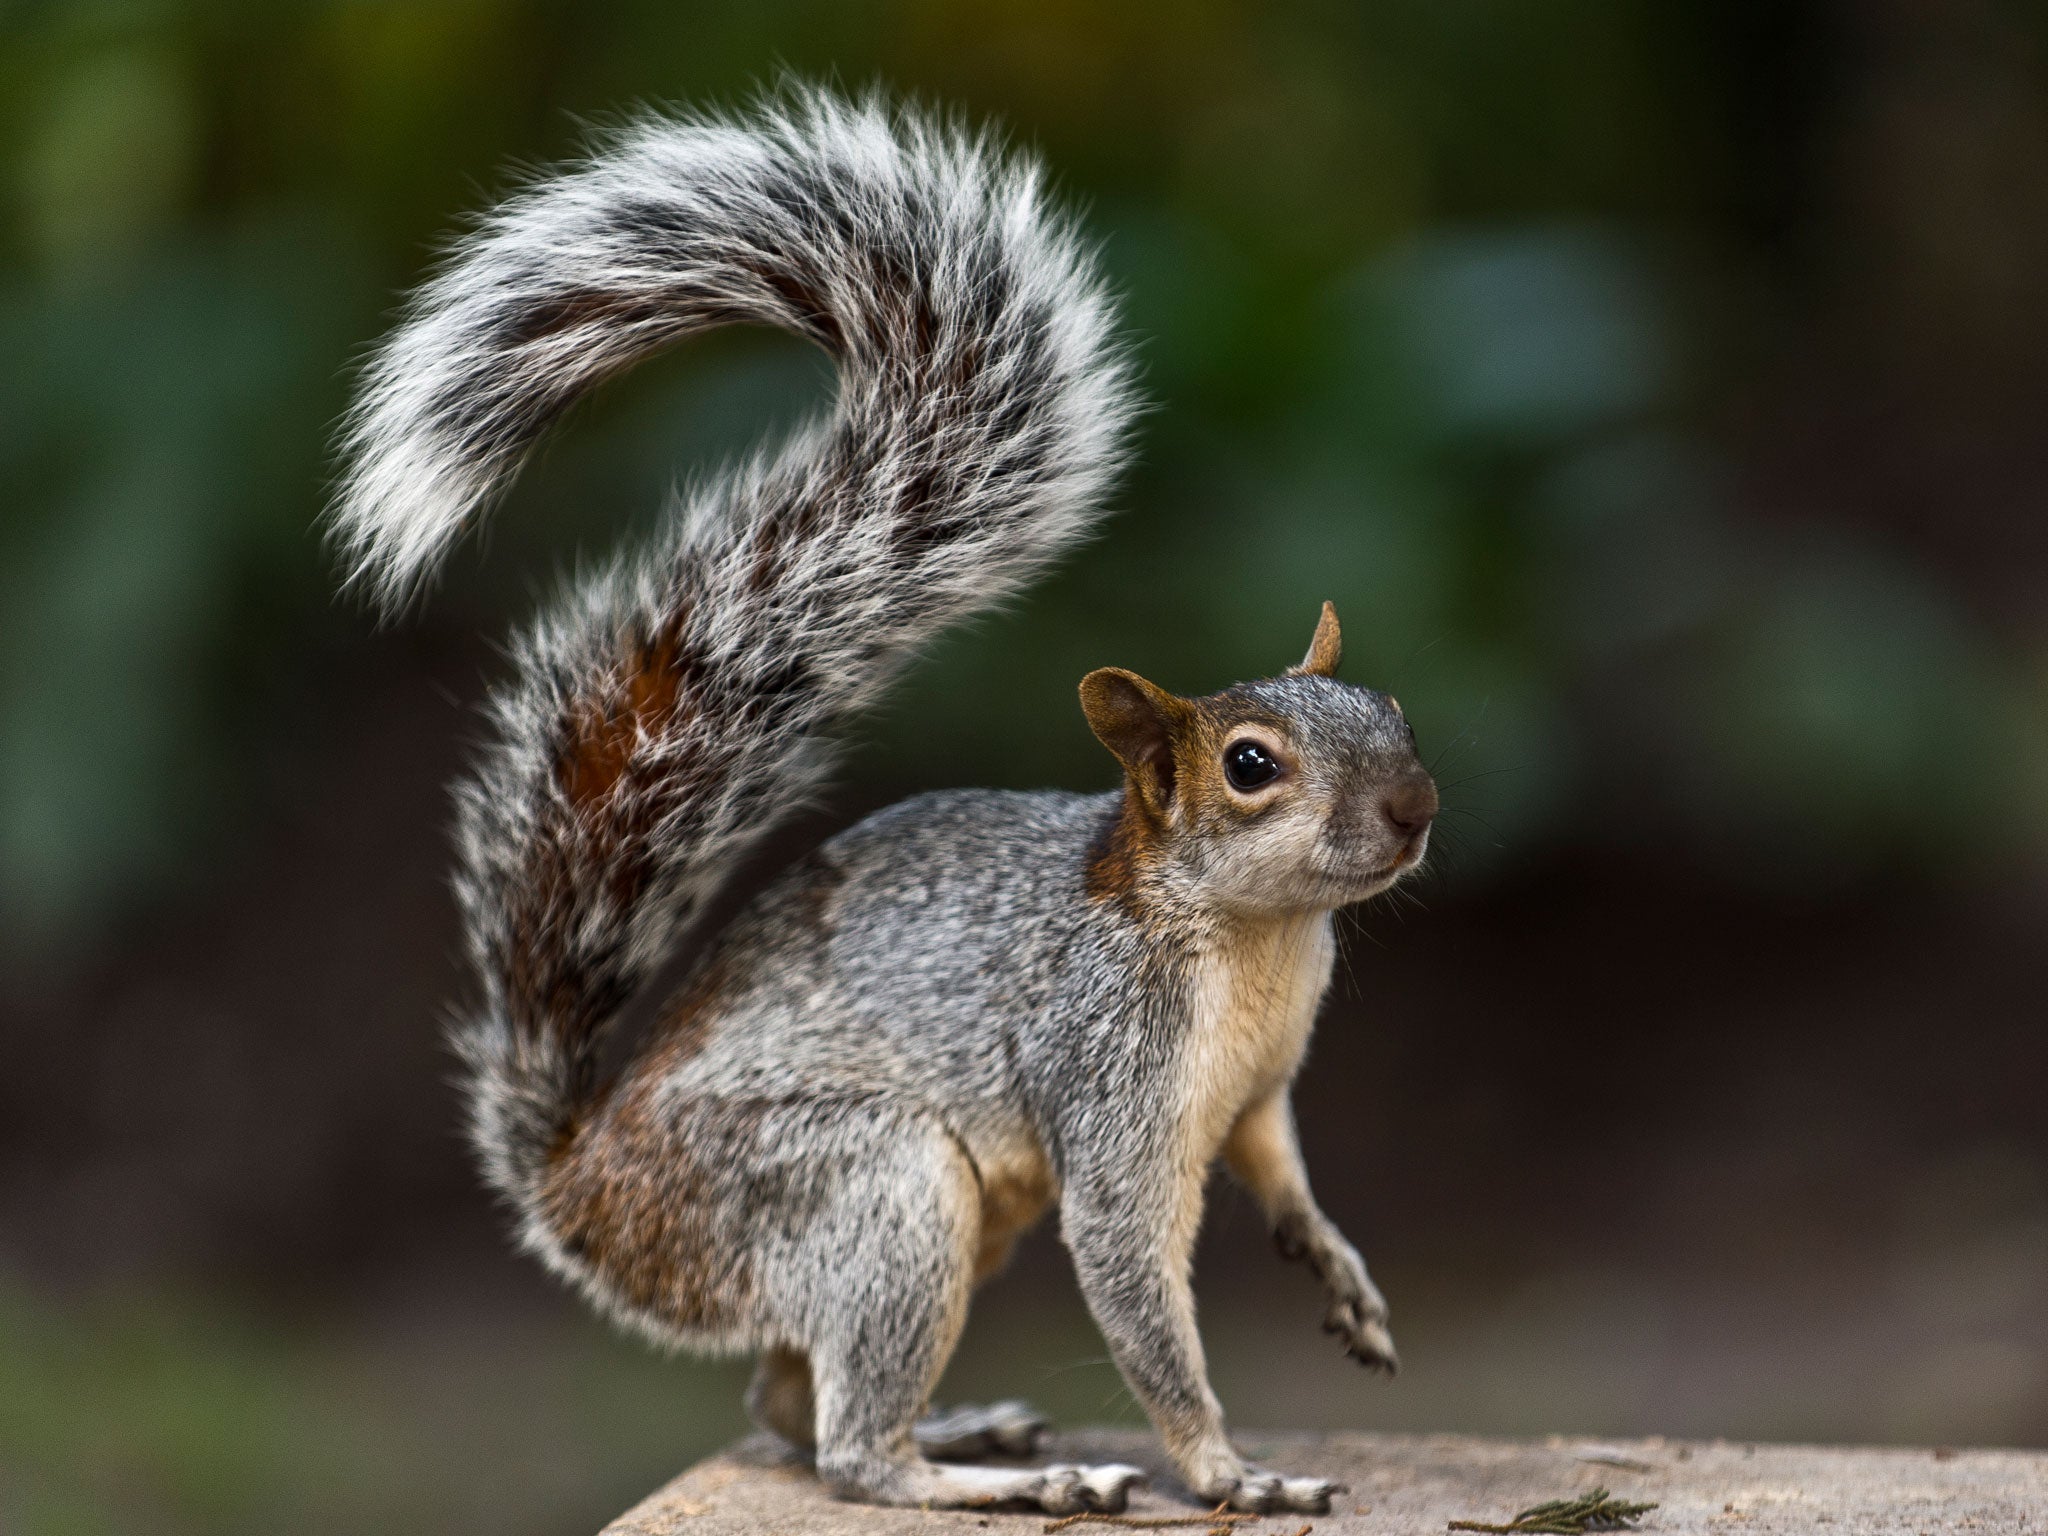 Grey squirrels will be culled in any way seen fit by landowners